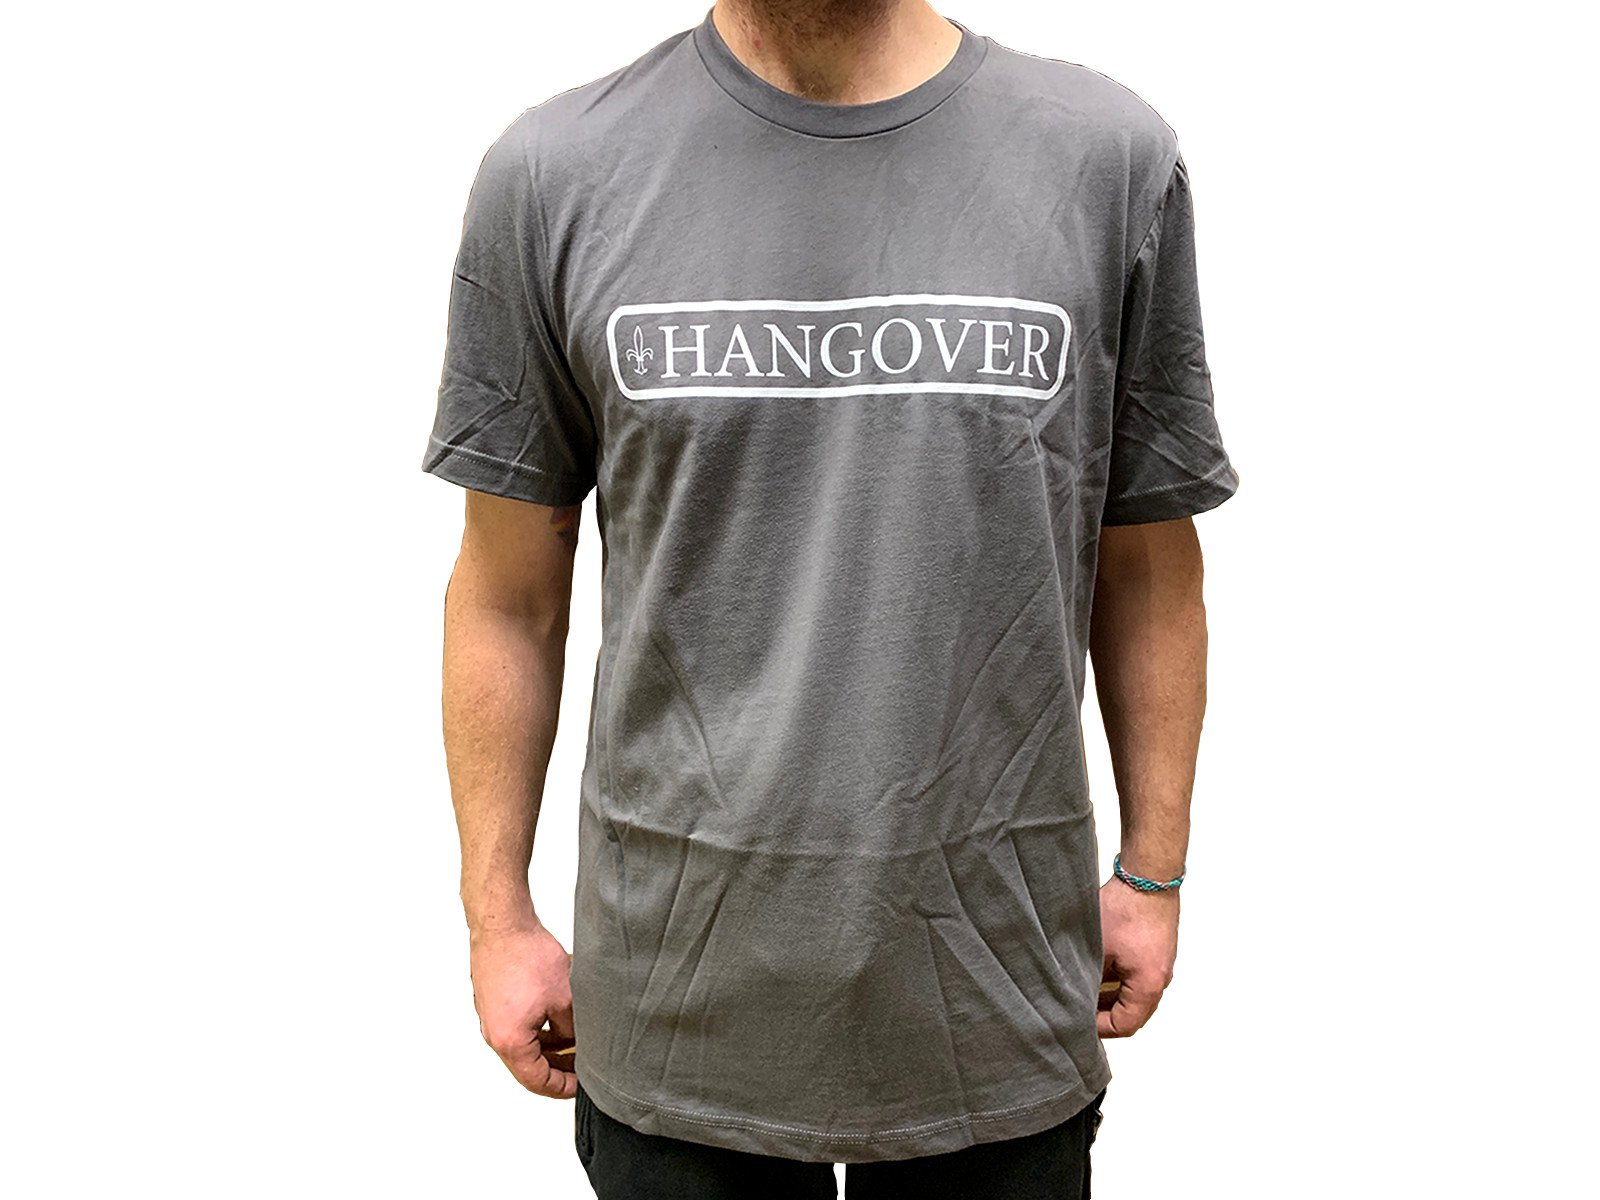 Hangover Patch 4 Pack - Pants Store